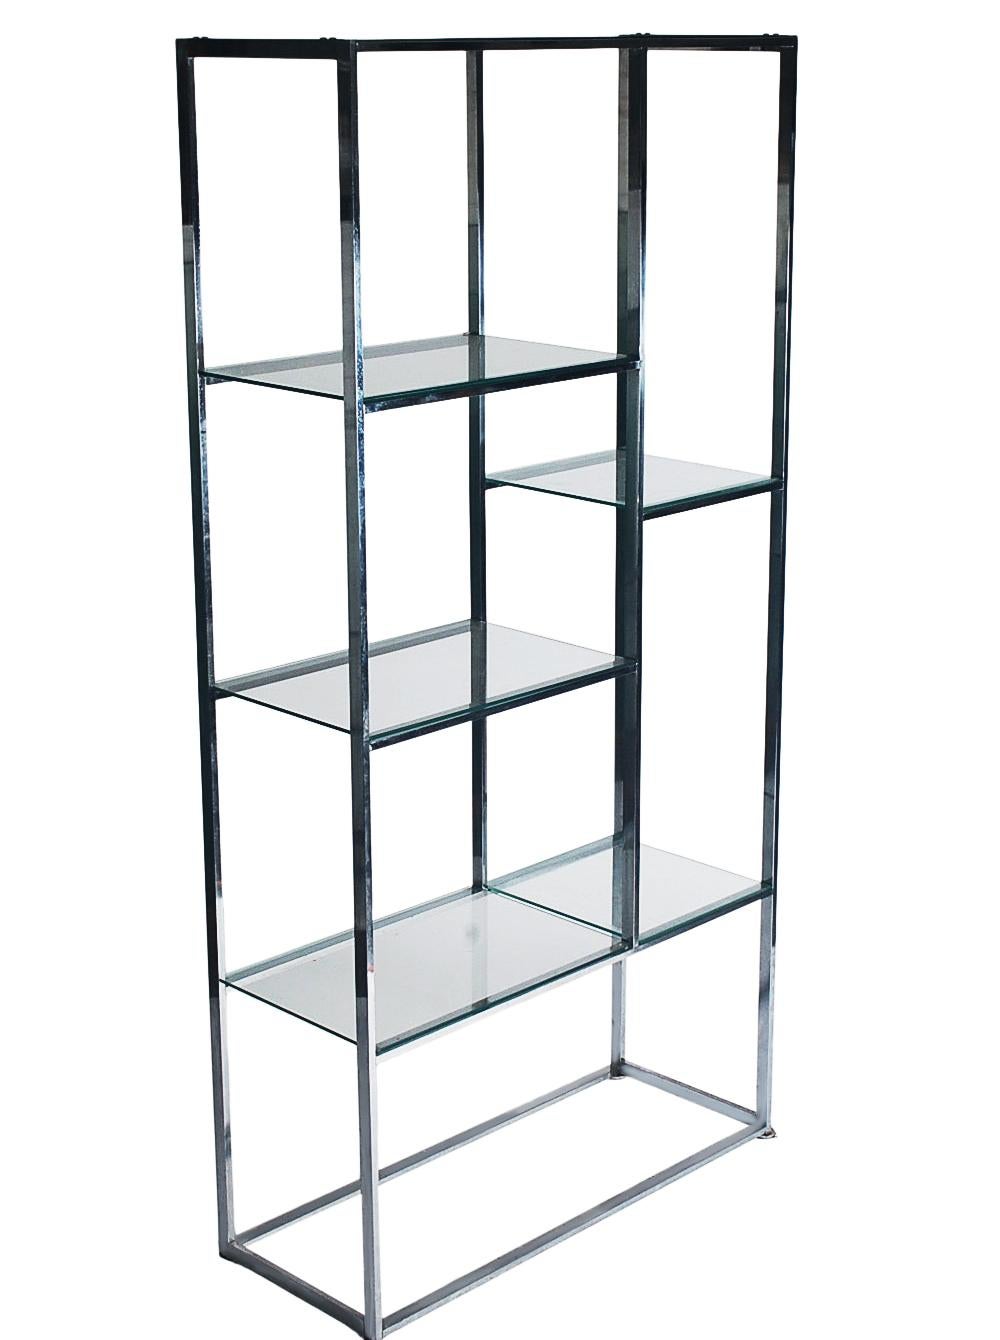 1970's Mid Century Milo Baughman Chrome Flatbar & Glass Etagere Wall Unit In Good Condition For Sale In Philadelphia, PA